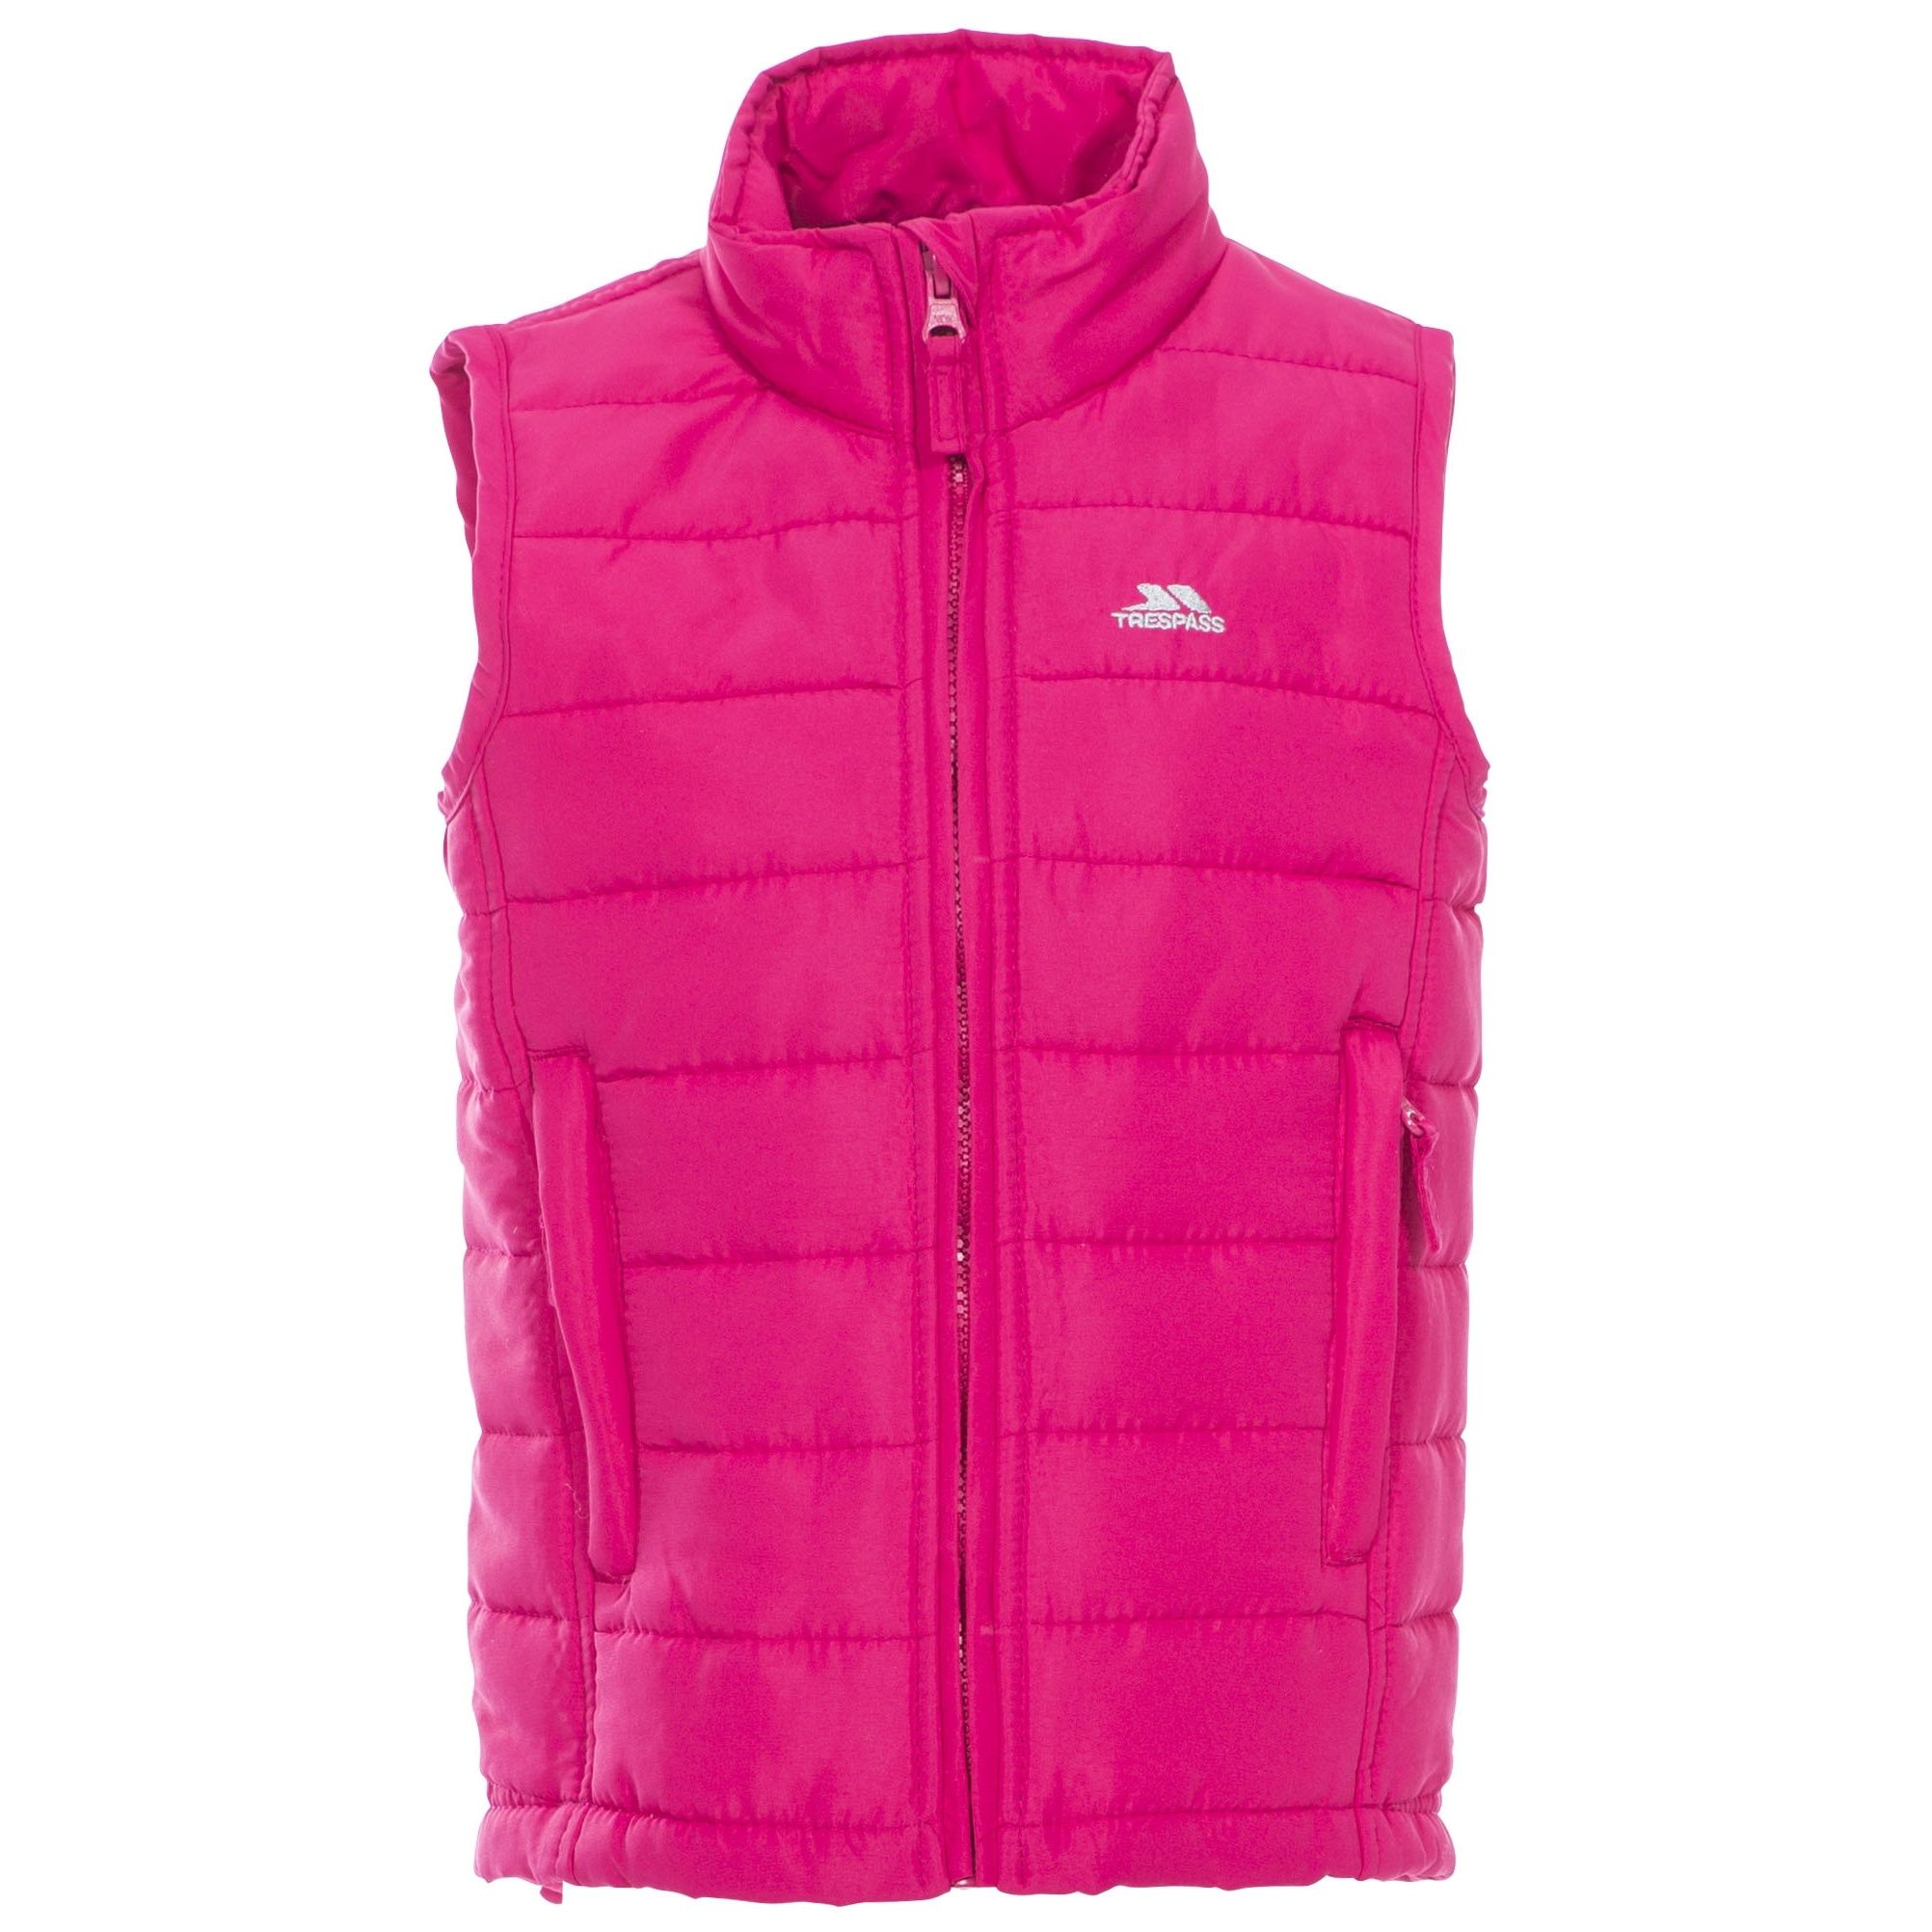 Lightly quilted gilet. 2 pockets. Shell: 100% Polyester, Lining: 100% Polyester, Filling: 100% Polyester. Trespass Childrens Chest Sizing (approx): 2/3 Years - 21in/53cm, 3/4 Years - 22in/56cm, 5/6 Years - 24in/61cm, 7/8 Years - 26in/66cm, 9/10 Years - 28in/71cm, 11/12 Years - 31in/79cm.